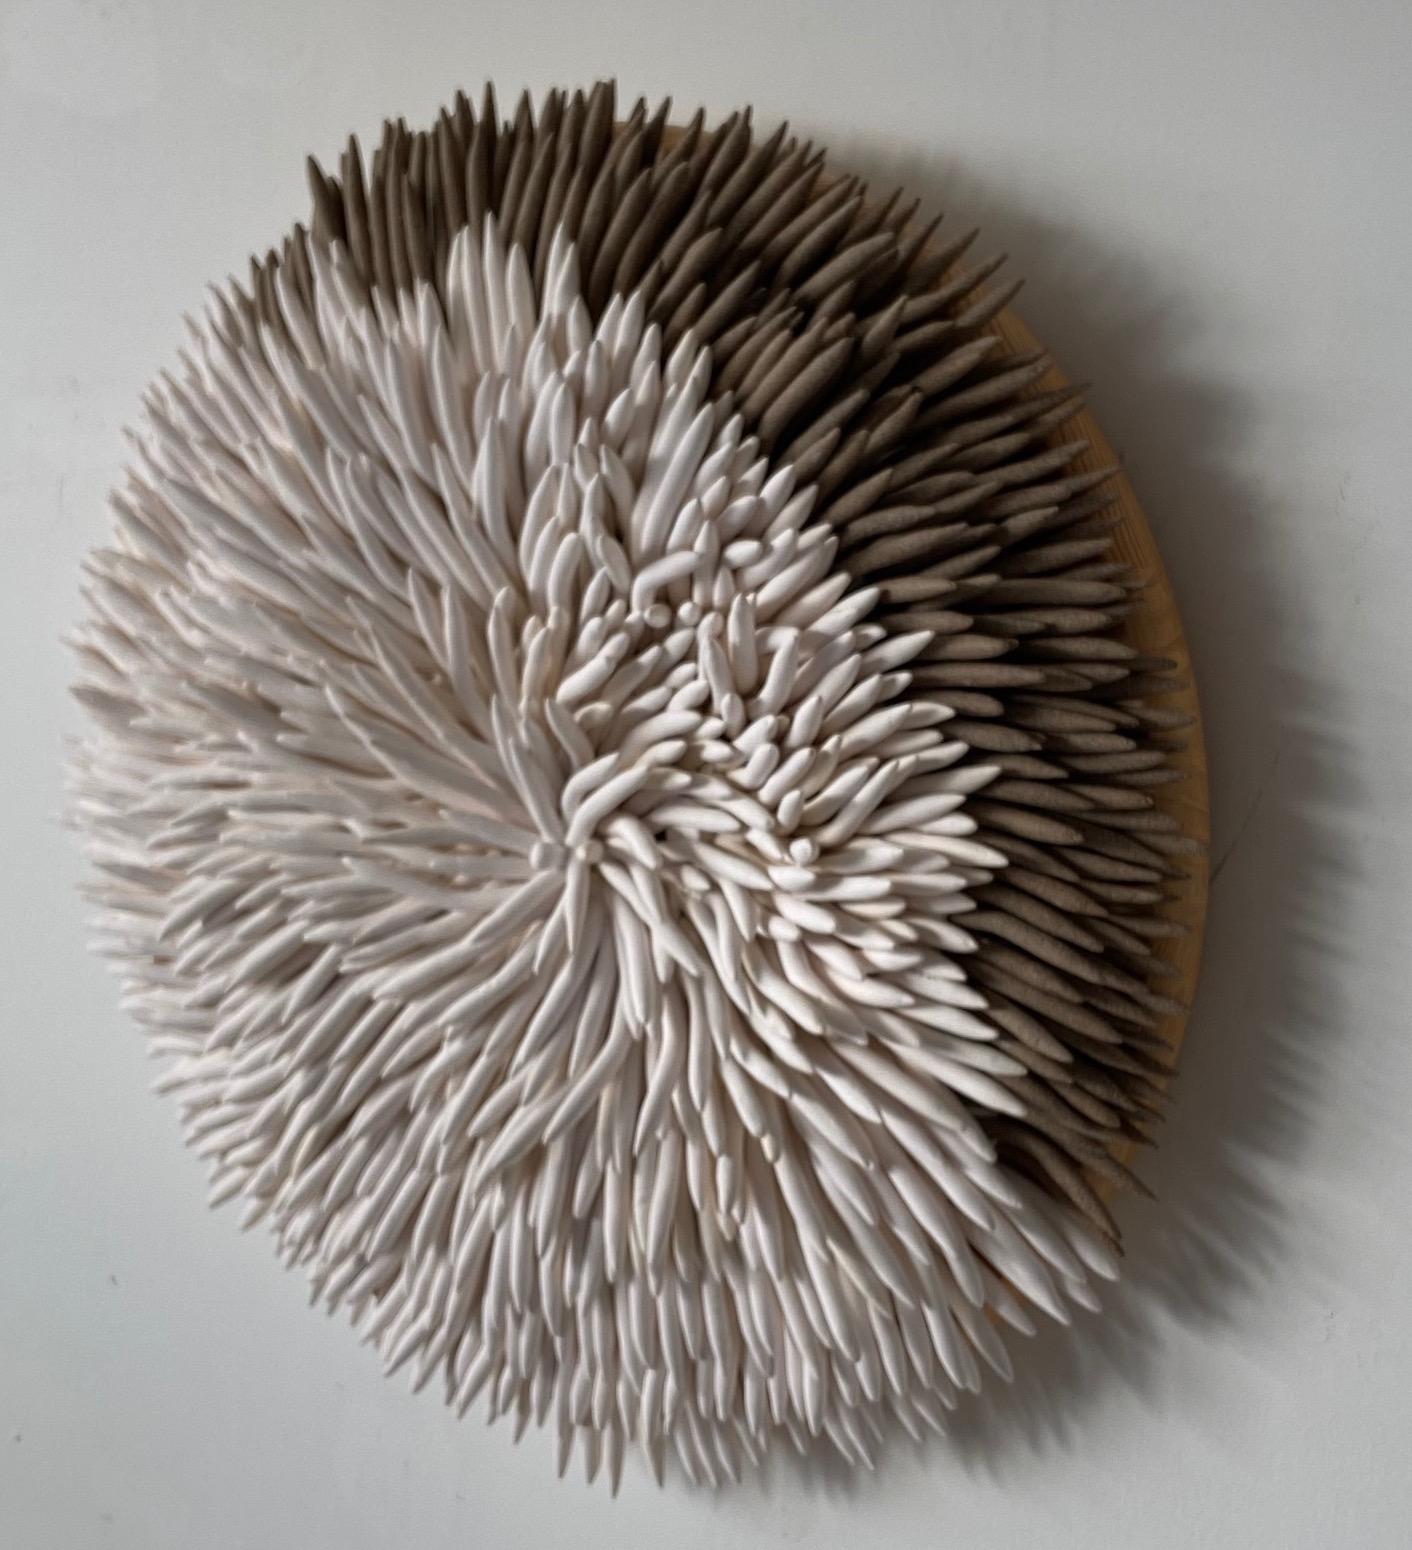 Emanation 2 - climate change coral ceramic wall sculpture in neutral tones - Sculpture by Sandar Giunta